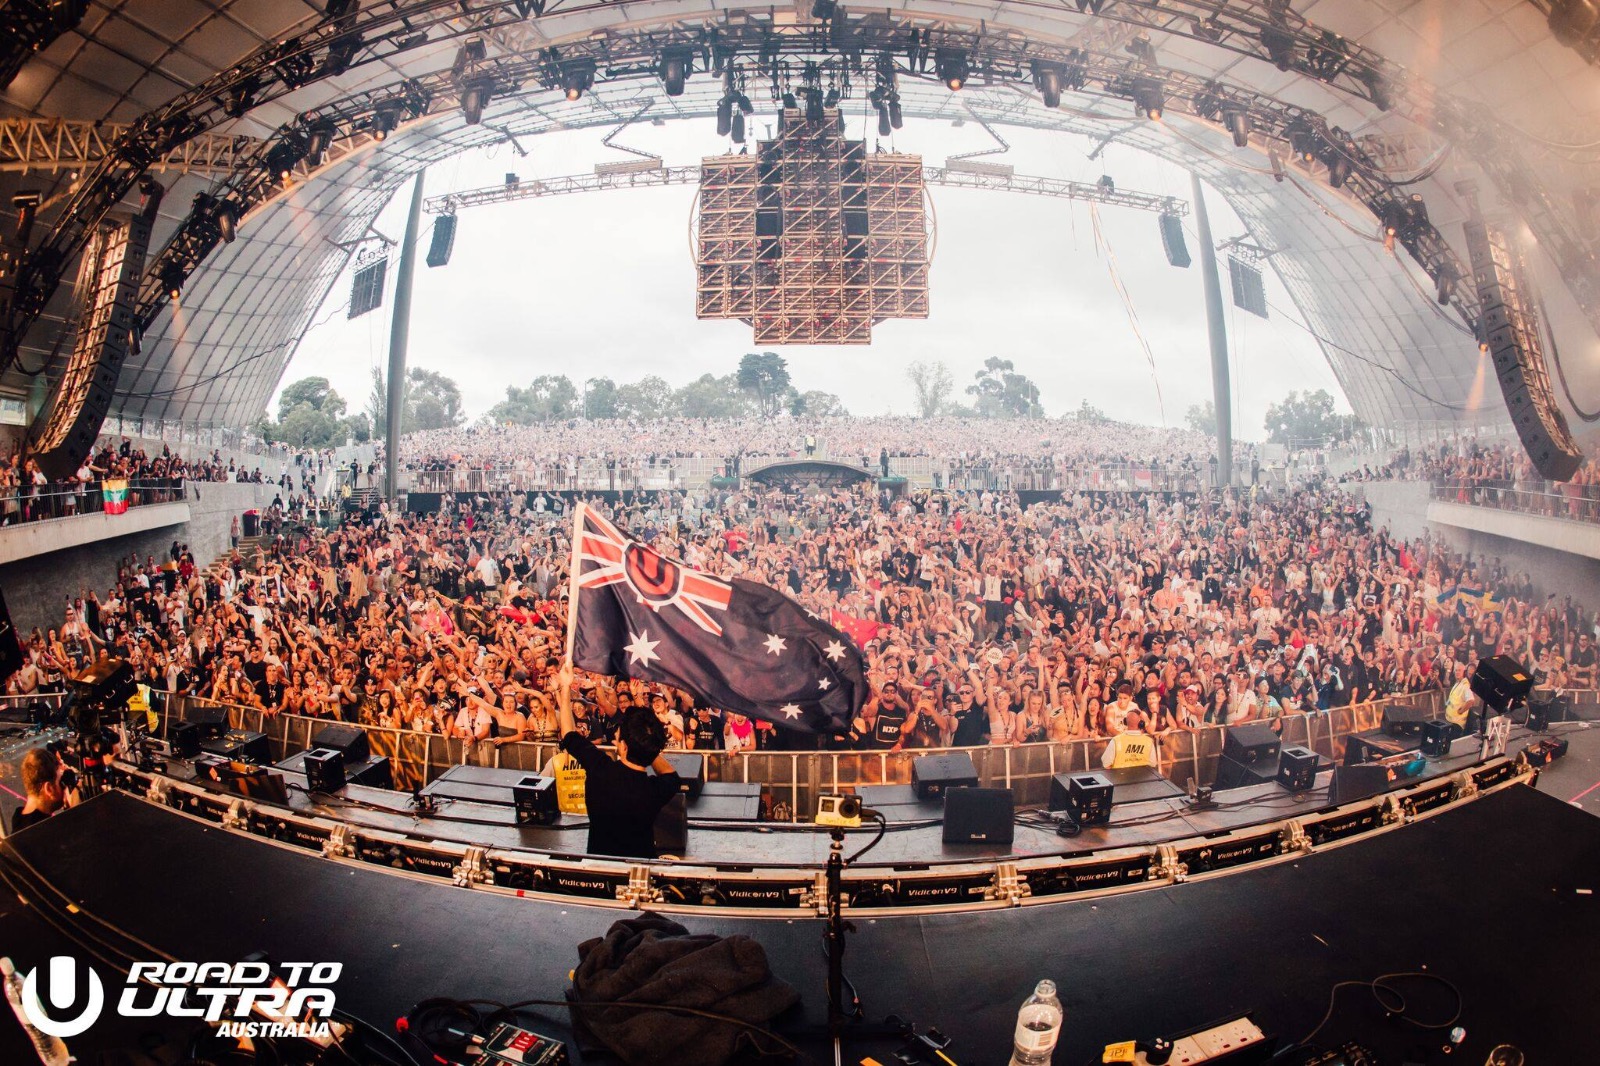 ULTRA AUSTRALIA 2019 to join the world famous birdcage